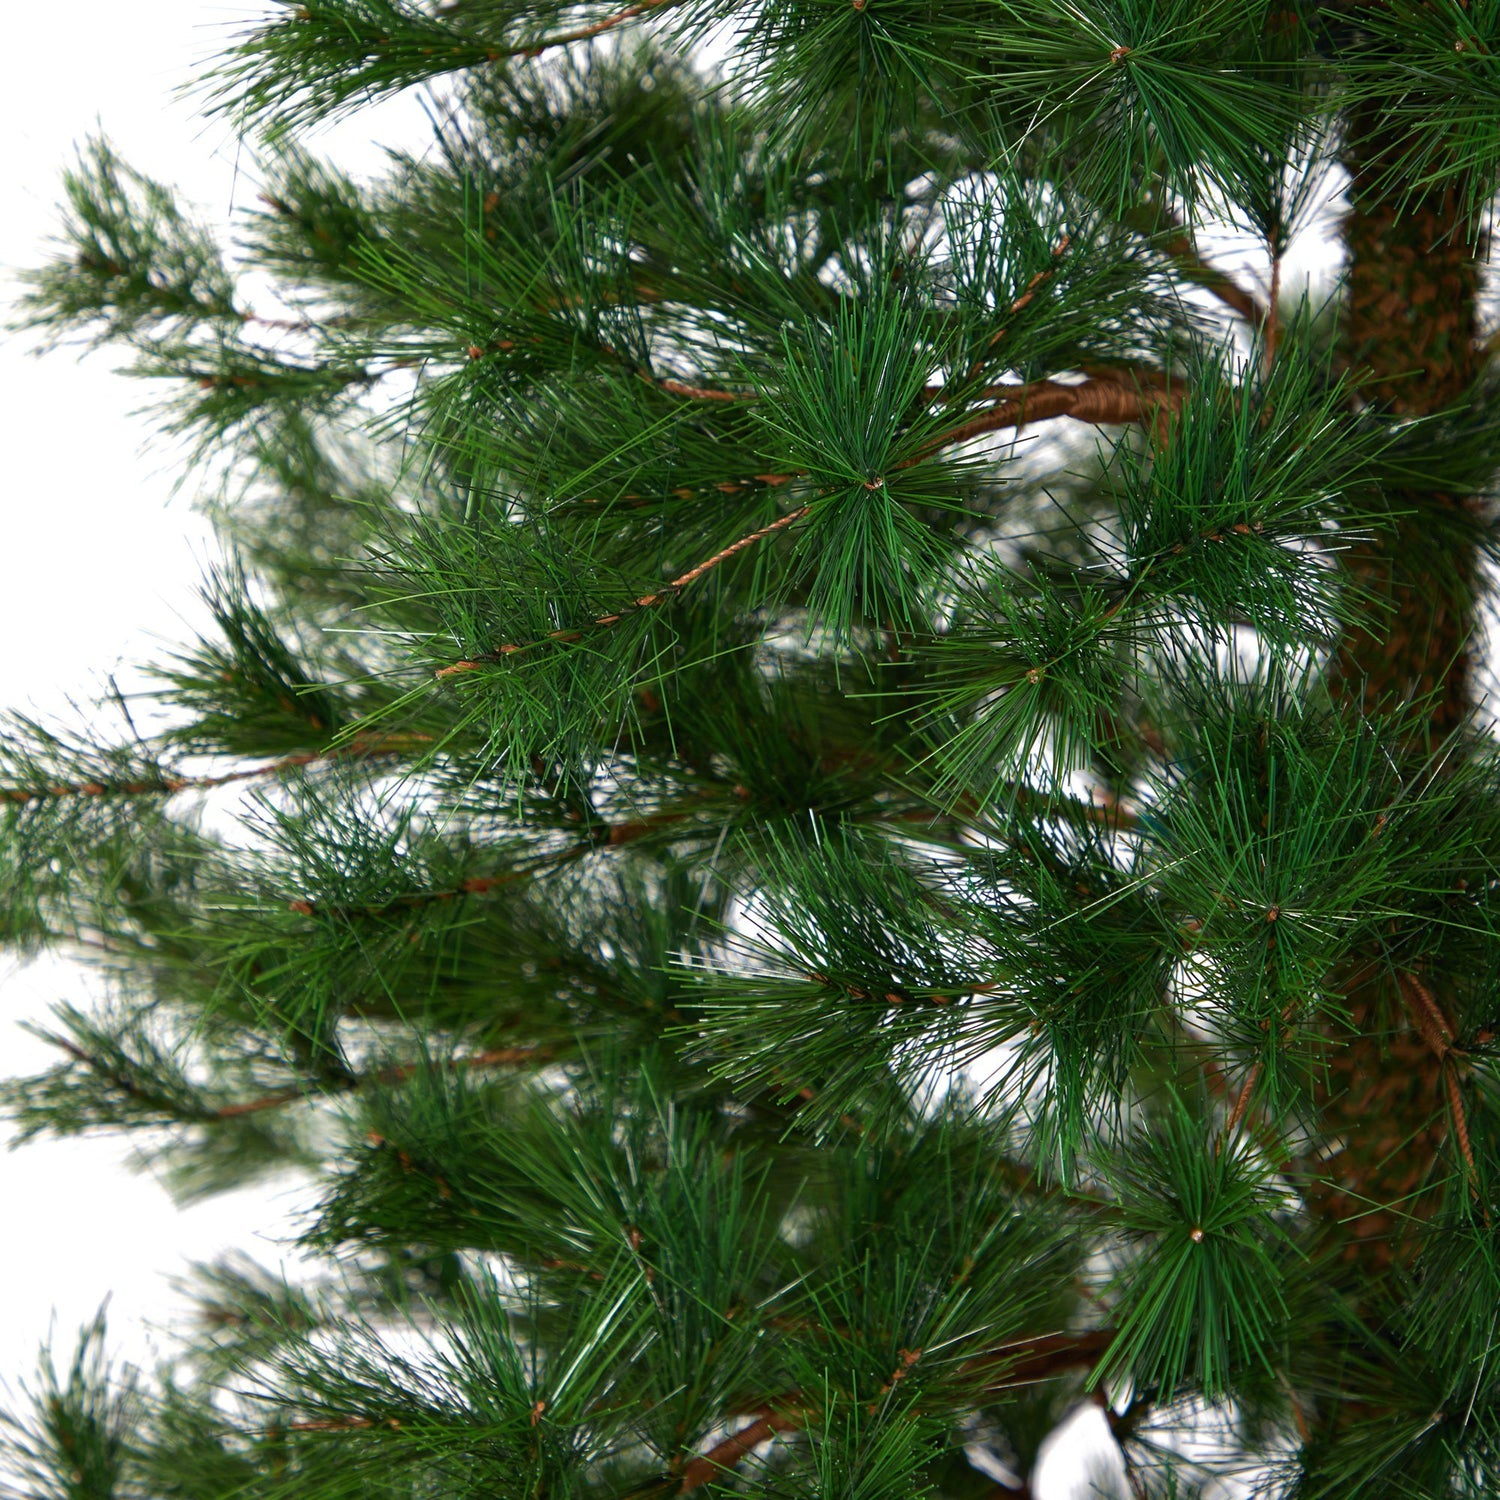 6’ Yukon Mixed Pine Artificial Christmas Tree with 864 Bendable Branches